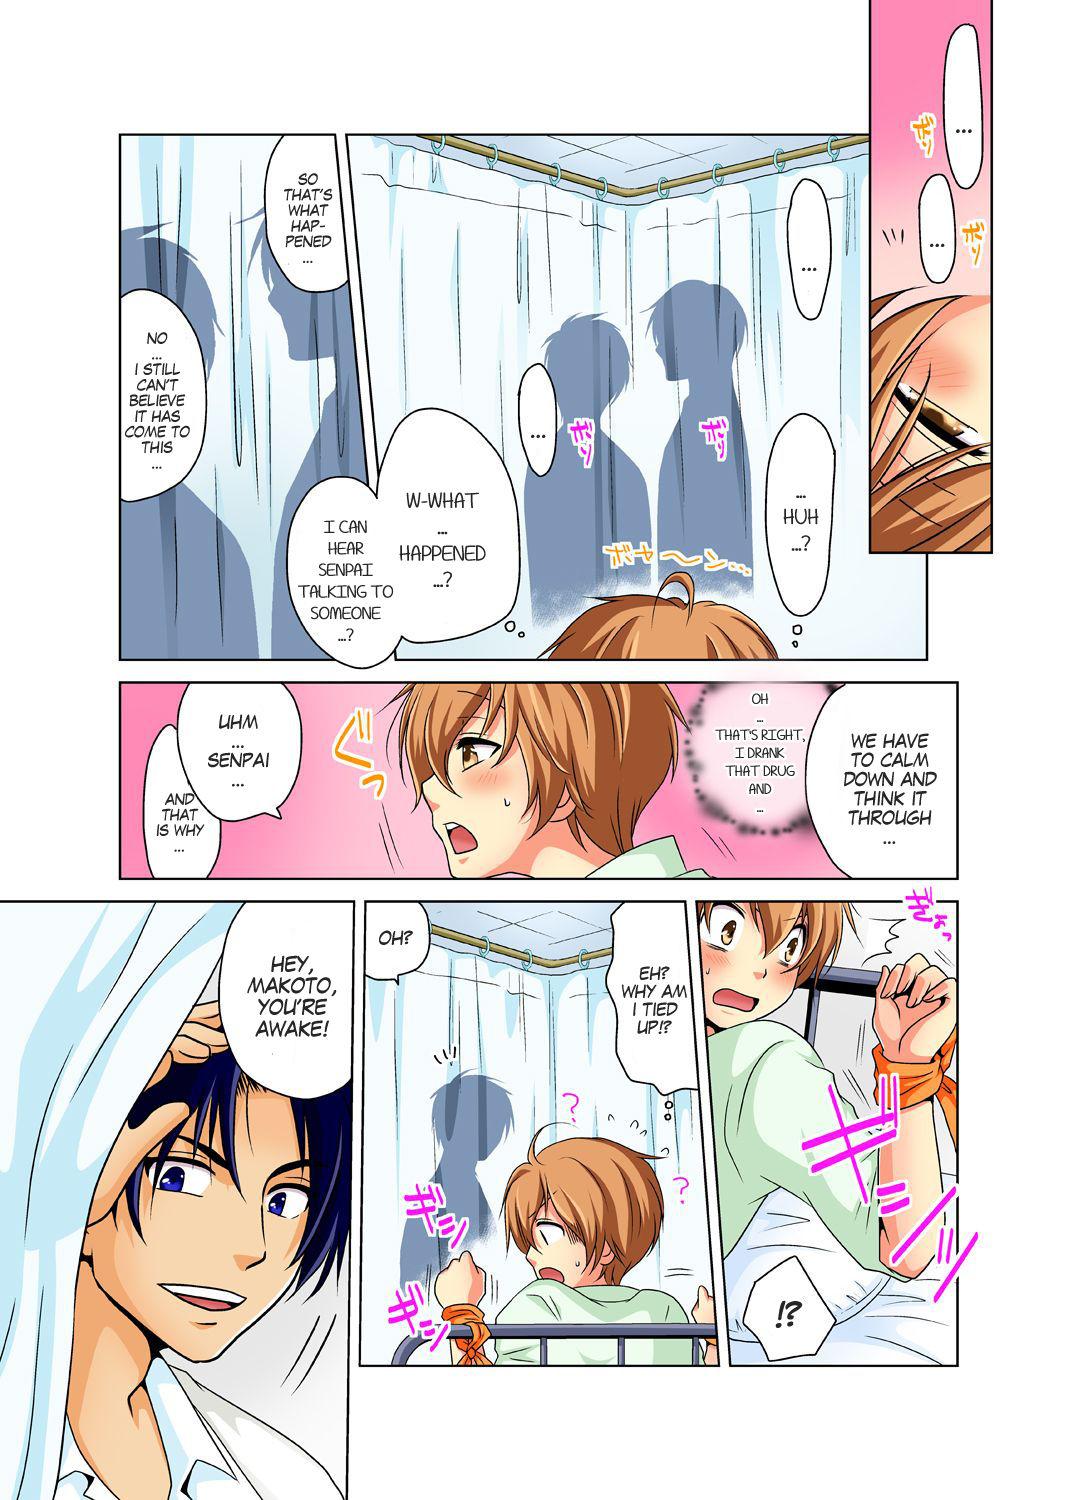 Joi Nyotaika de Ecchi Kenshin!? Mirudake tte Itta no ni... 1 | Gender Bender Into Sexy Medical Examination! You said that you were only going to look... 1 Blowjob Contest - Page 5